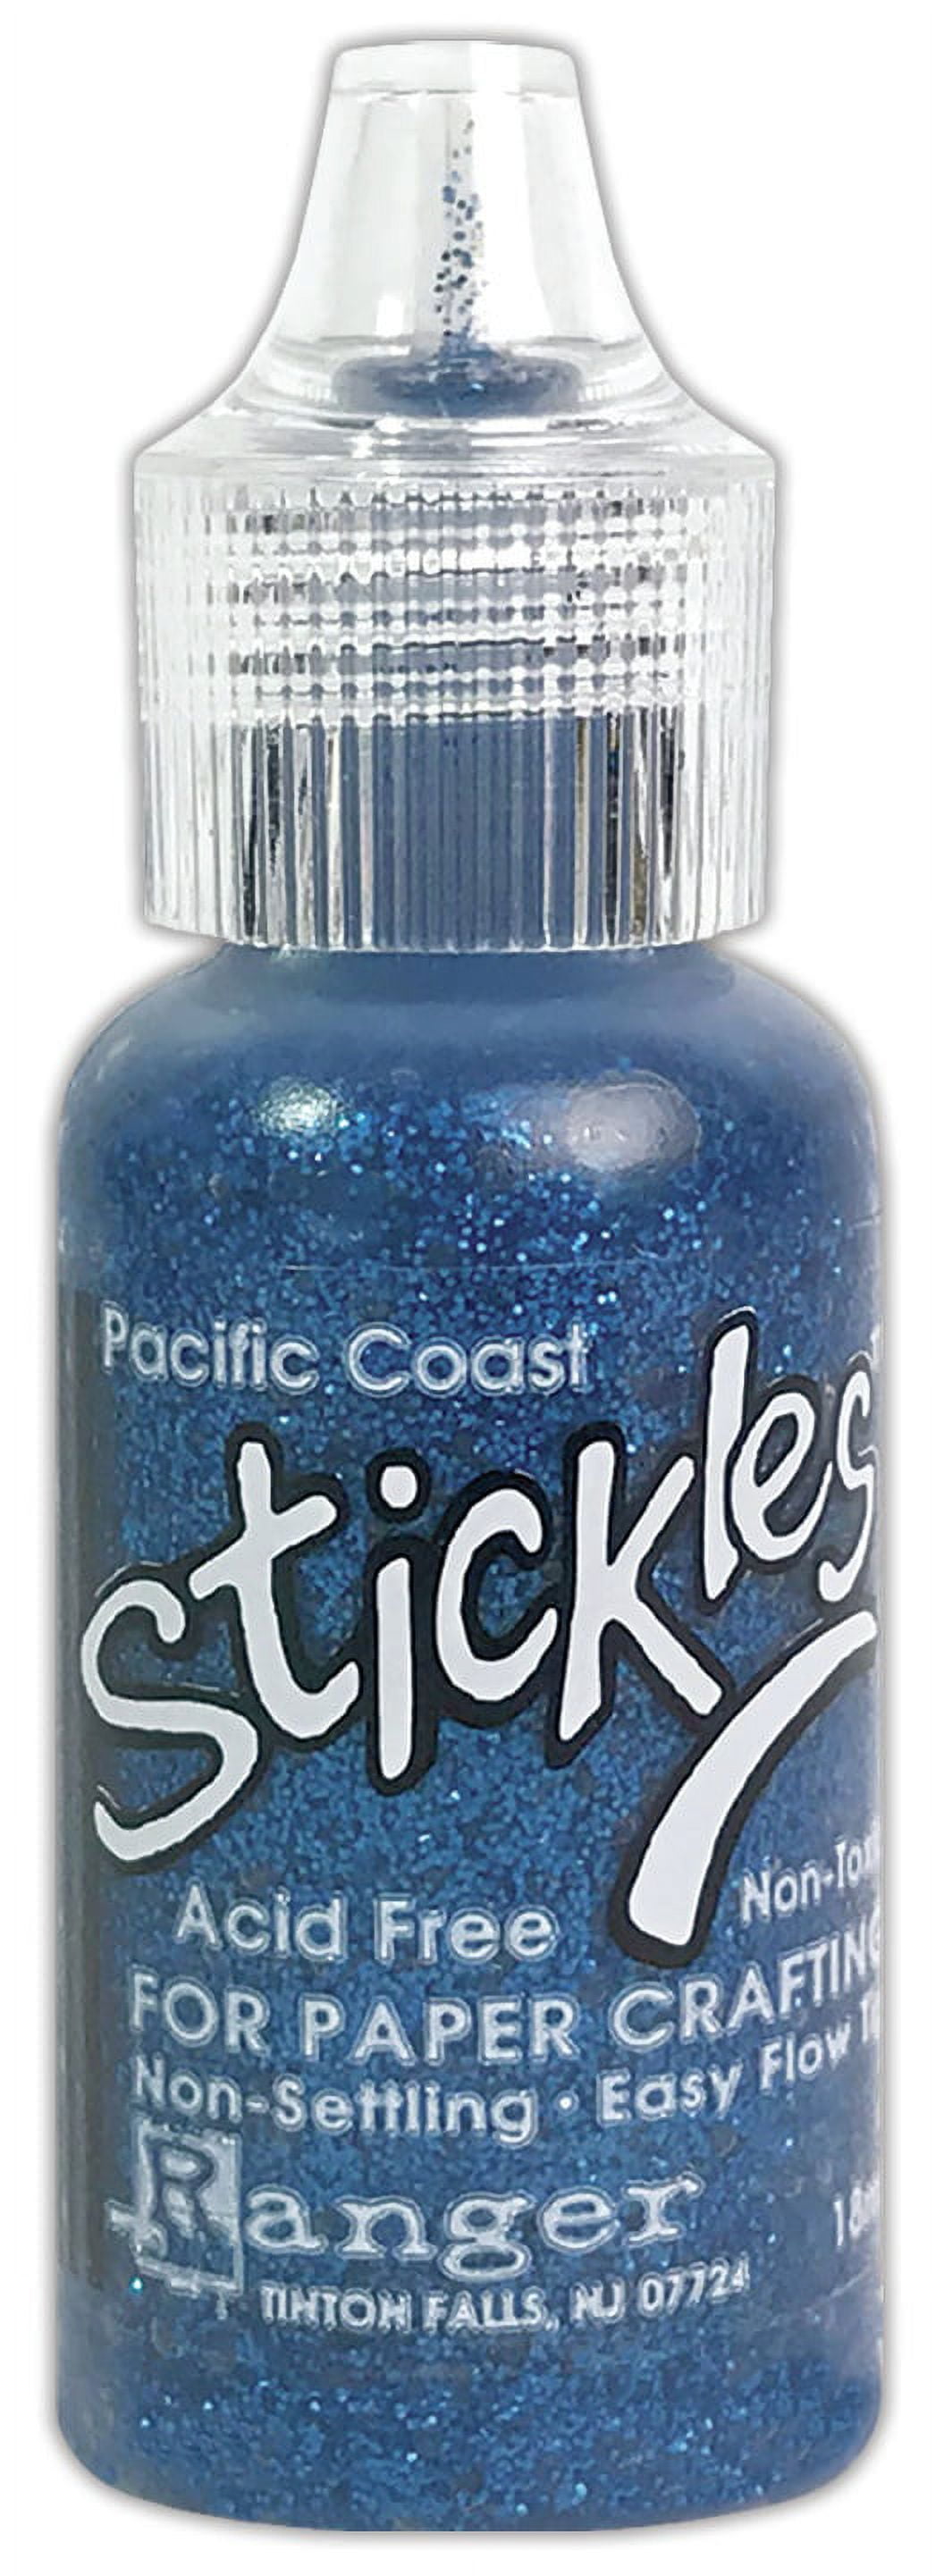 Stickles Glitter Glue .5oz – Copper – Ink About It on the go!